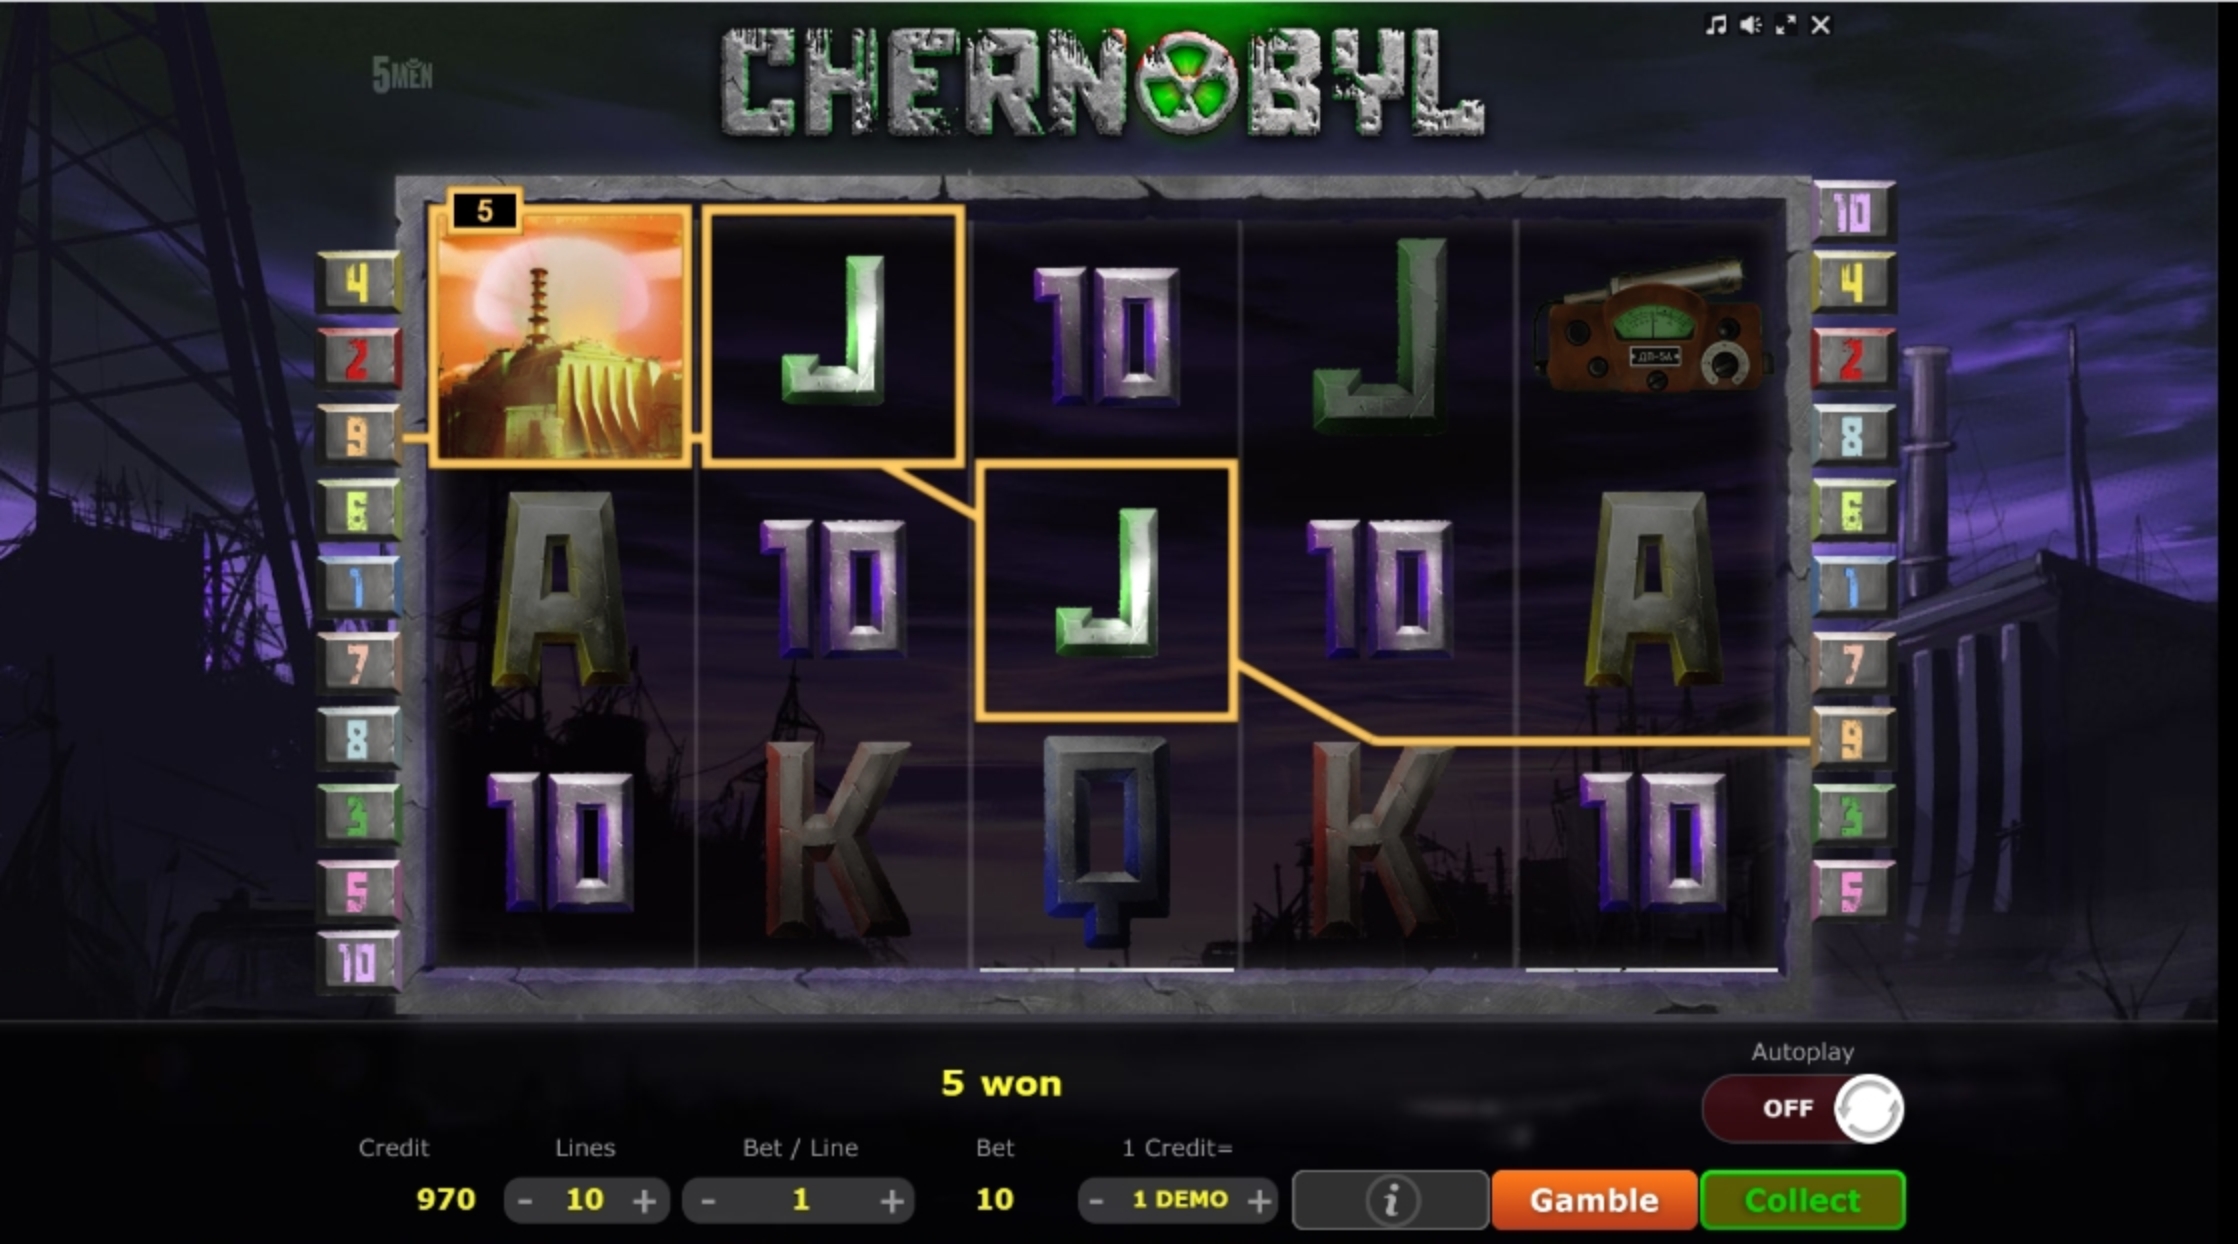 Win Money in Chernobyl Free Slot Game by Five Men Games